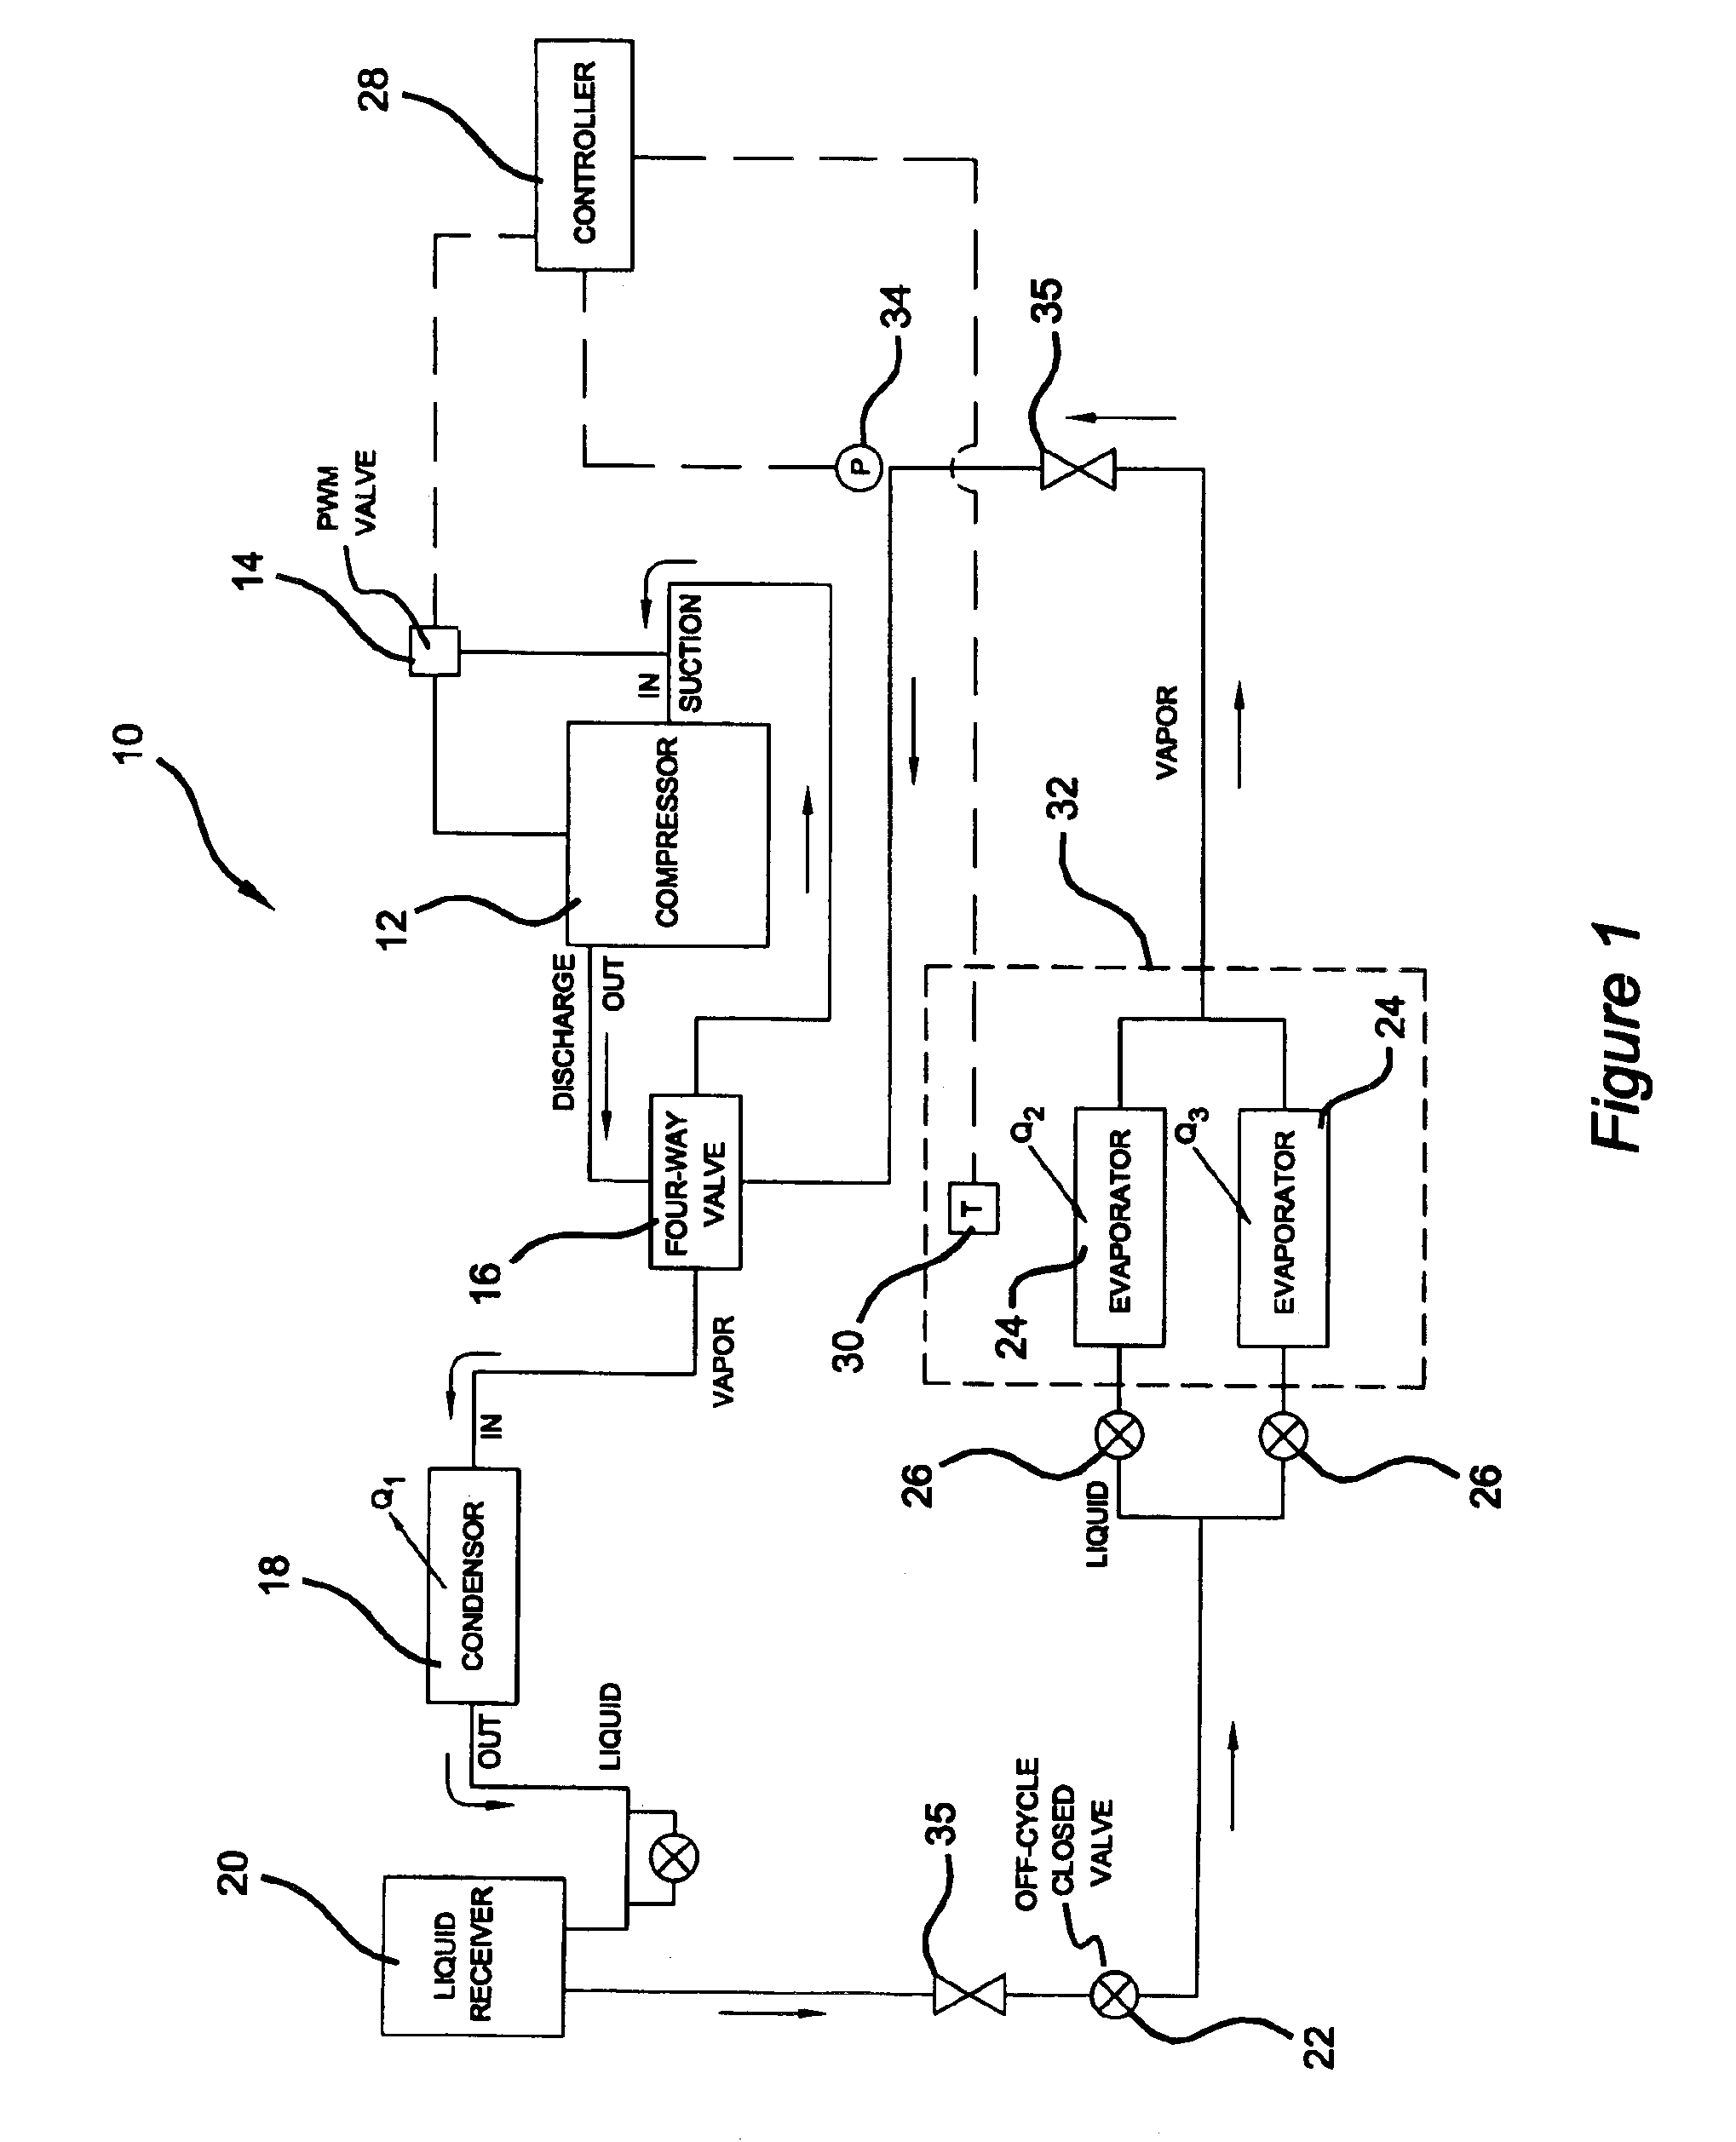 Cooling system with isolation valve